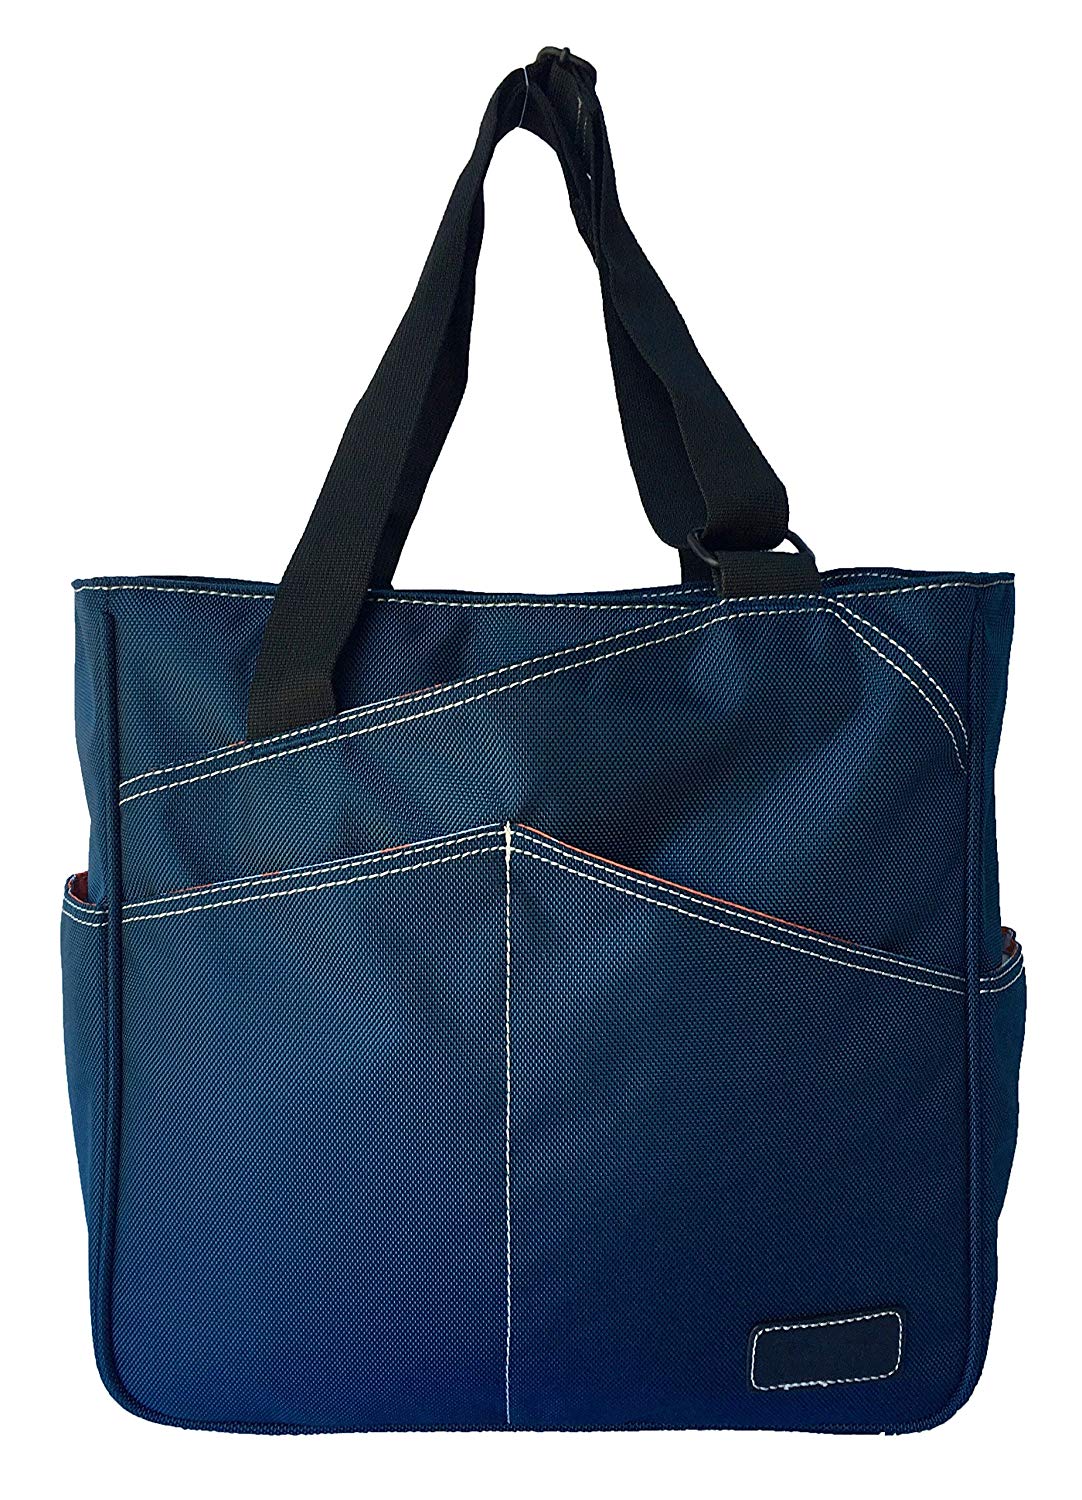 Maggie Mather Pickleball Tote Bag (Navy)